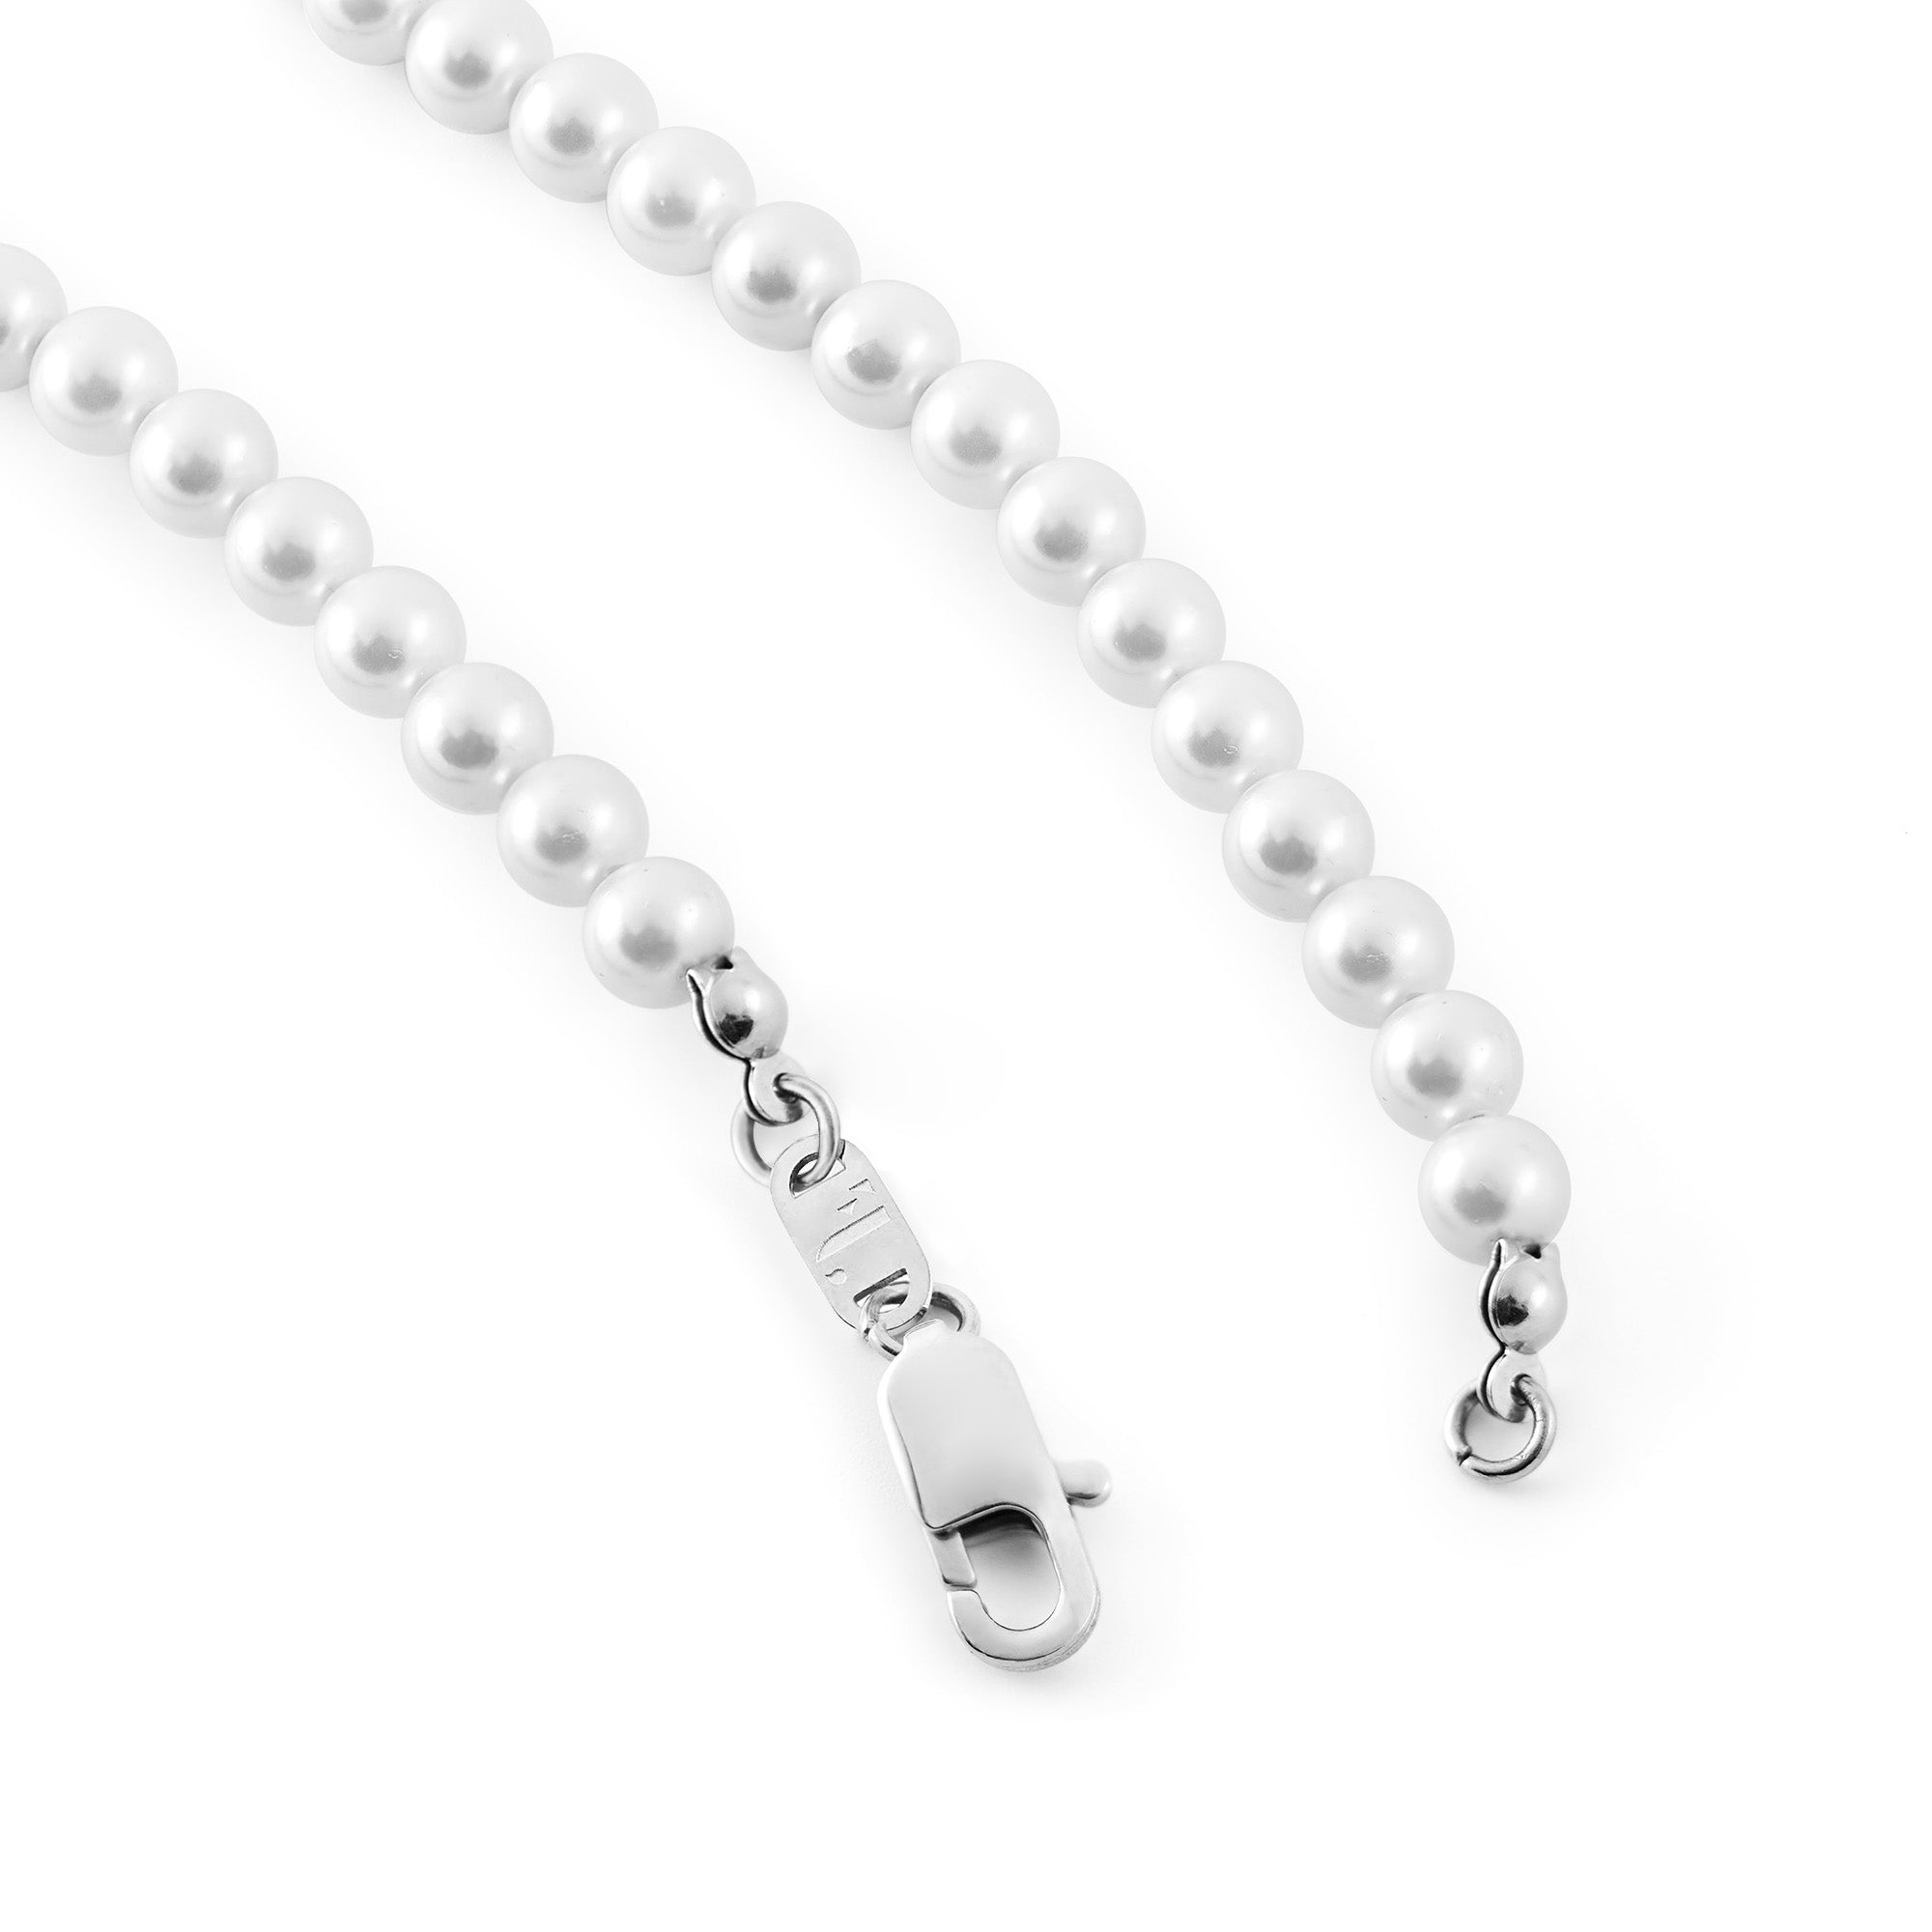 Var men's necklace by Five Jwlry, designed with white glass pearls complemented by a silver stainless steel buckle. Available in sizes 45cm and 50cm. Crafted from water-resistant 316L stainless steel. Hypoallergenic with a 2-year warranty.